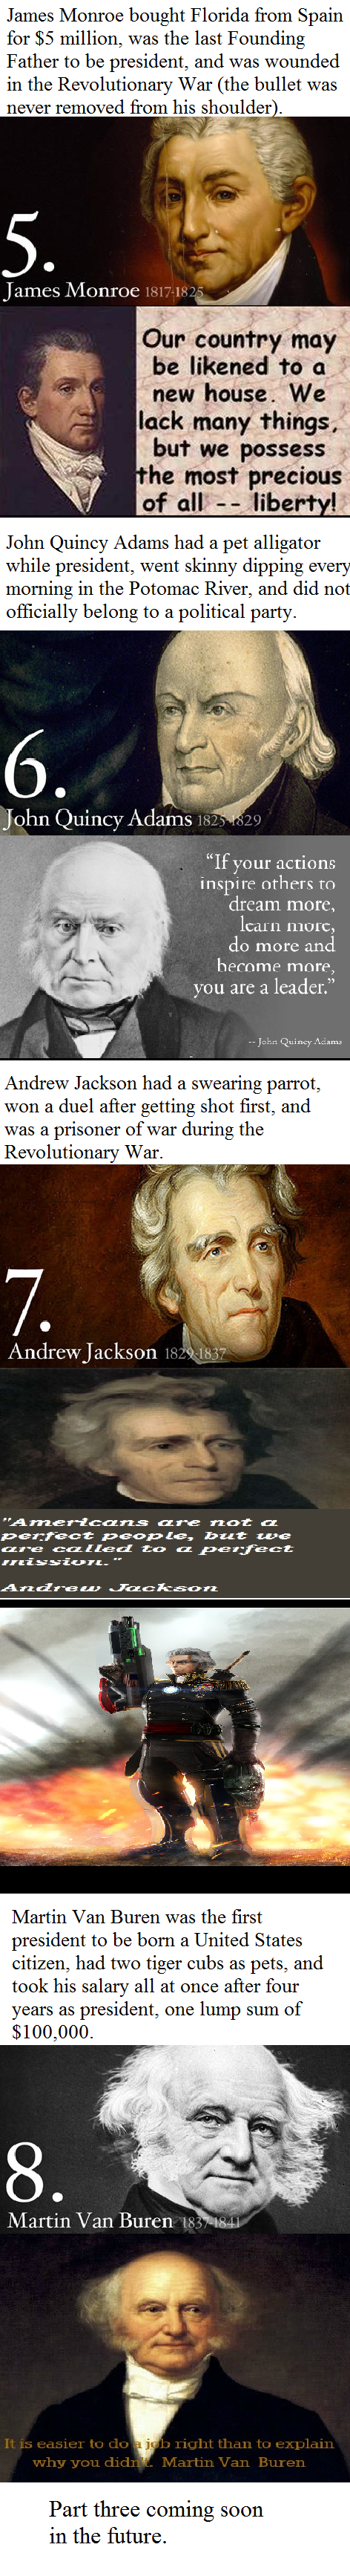 History Time - U.S. Presidents two. part one: .. Andrew Jackson was a asshole and pretty corrupt but he also makes for some interesting stories. First president to have an assassination attempt on his life..bo